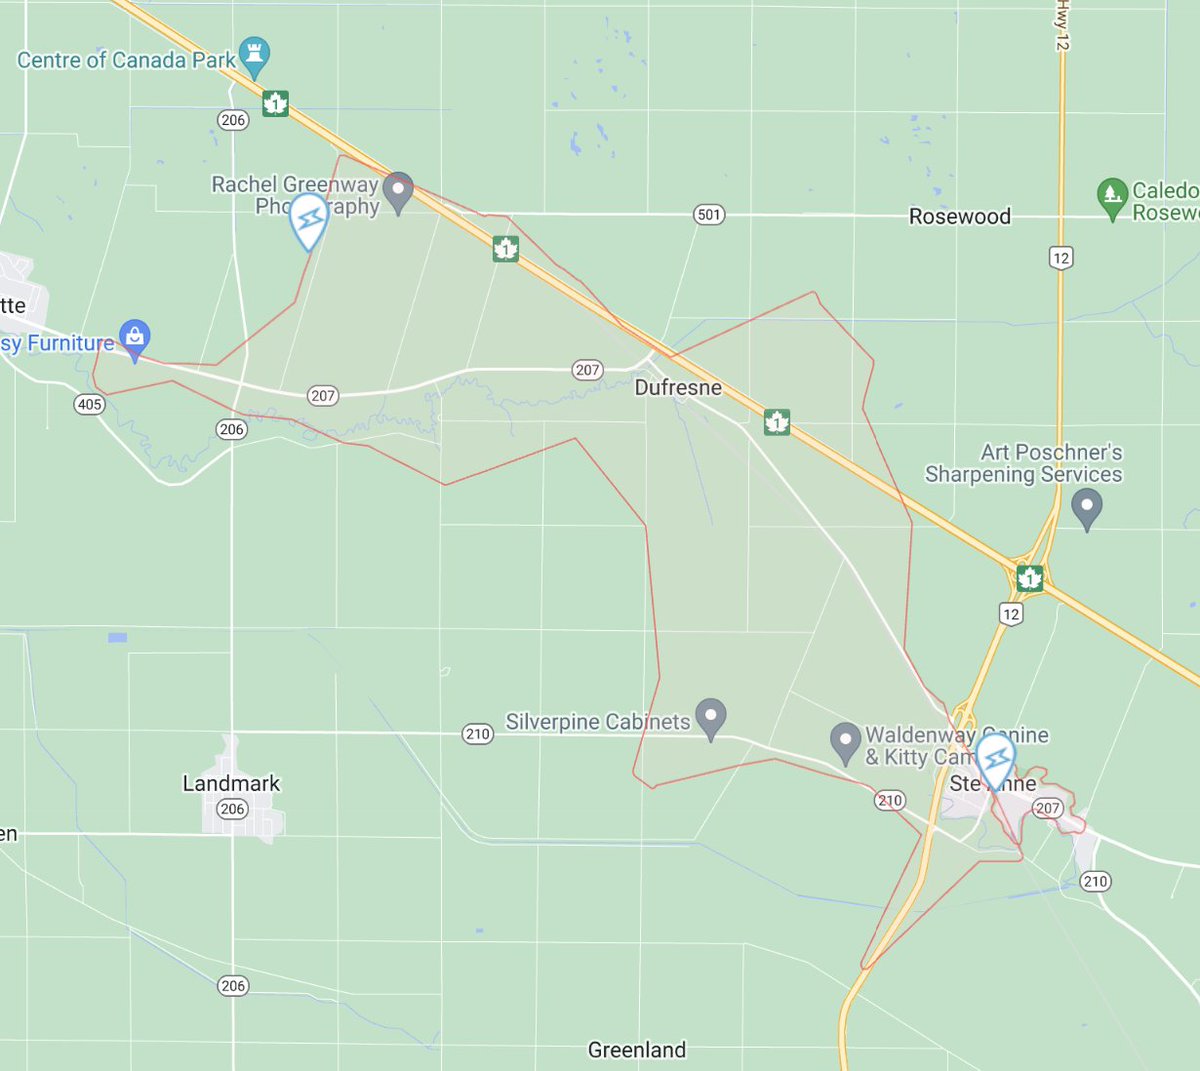 STE ANNE/DUFRESNE: We need to take an outage overnight this weekend to make equipment repairs and replace 2 poles. Power will be out for about 1,000 customers 11 p.m. Sunday evening. We're hoping to have power back on by 3 a.m. Monday morning #MBoutage